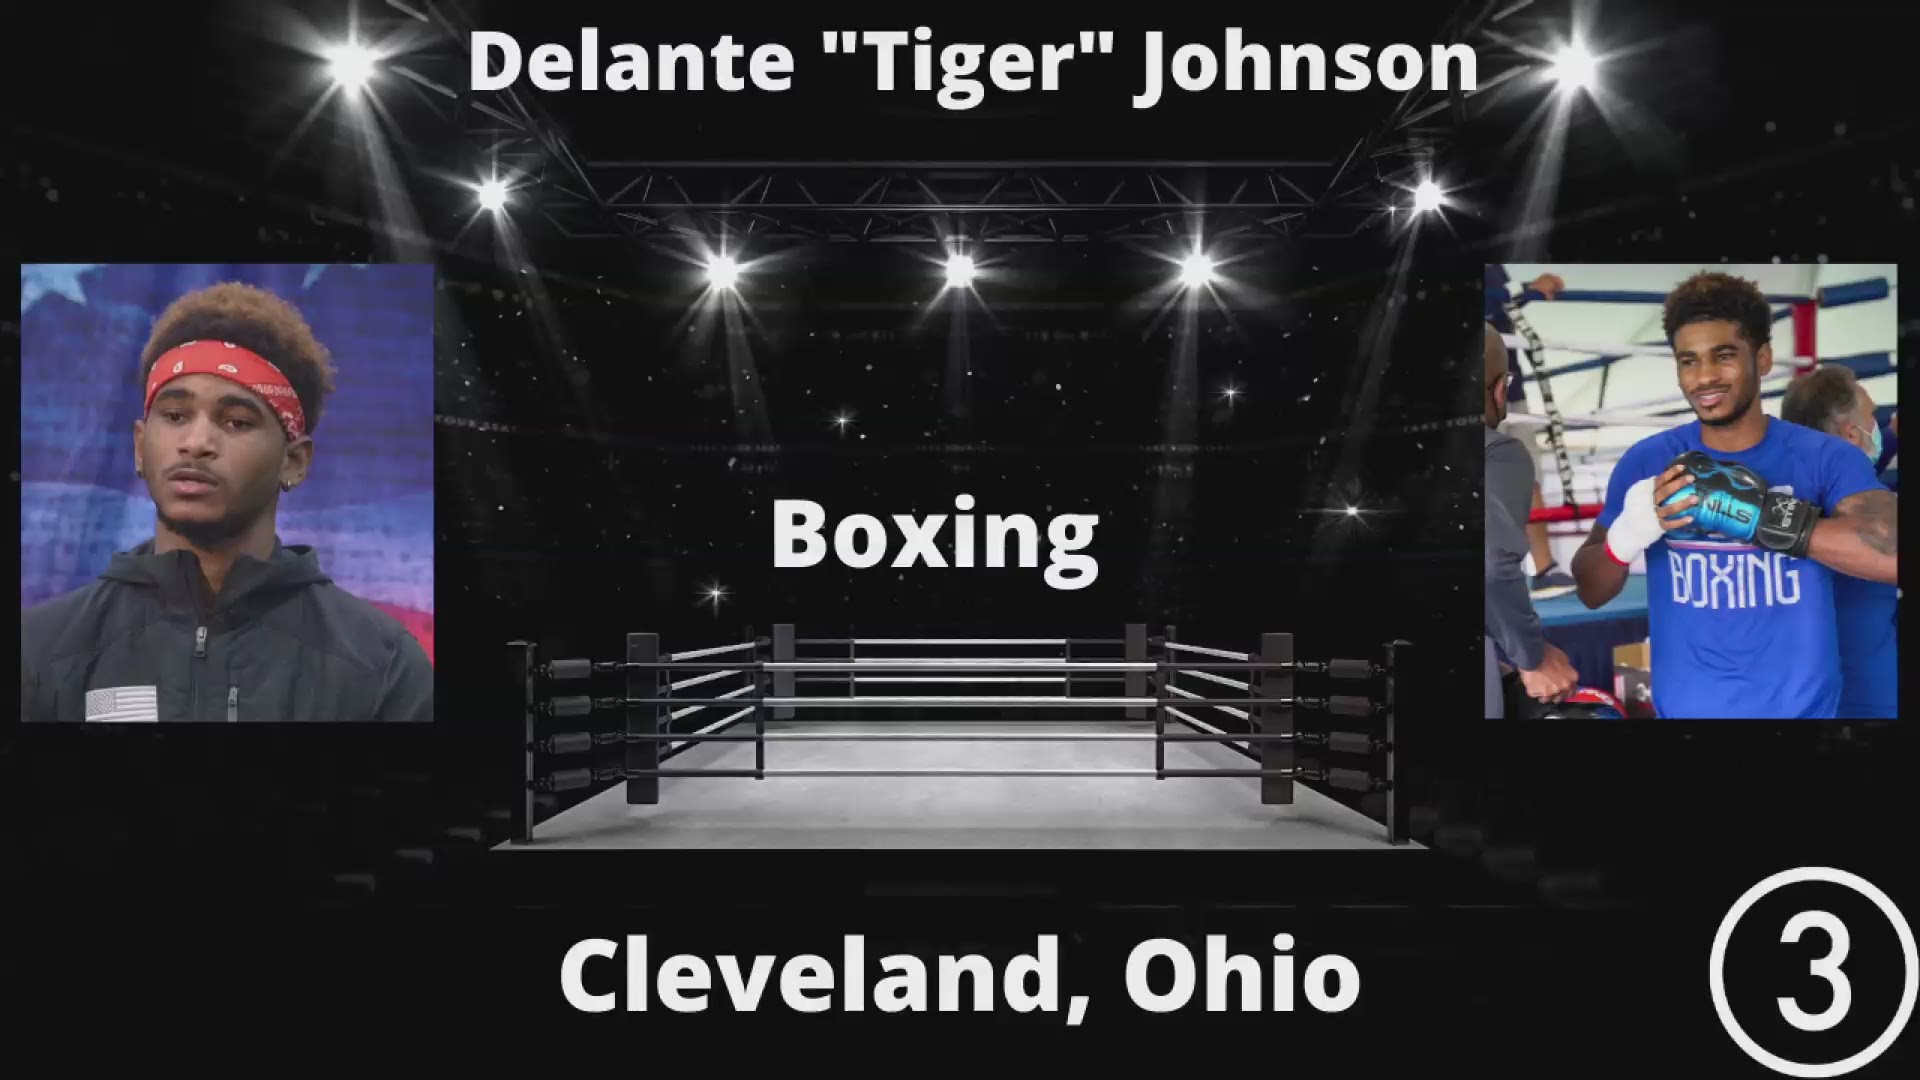 Delante “Tiger” Johnson is the fourth straight boxer from Cleveland to reach the Olympics.